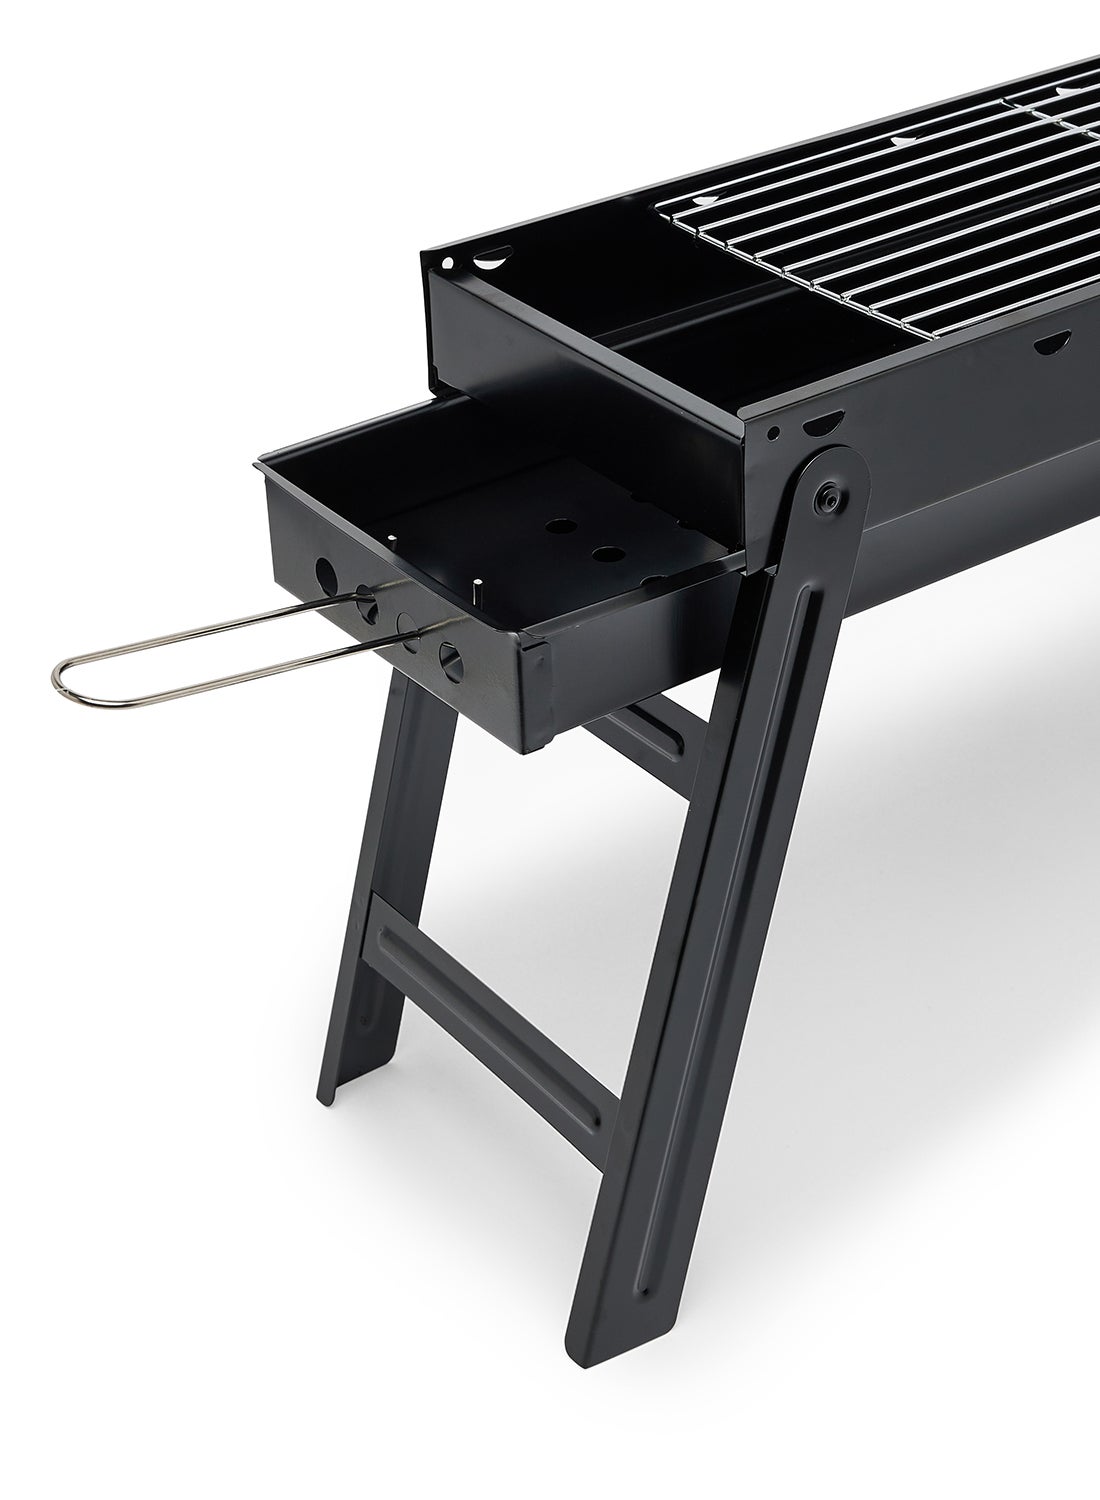 Portable Charcoal BBQ Grill With Foldable Legs Black/Rectangle 